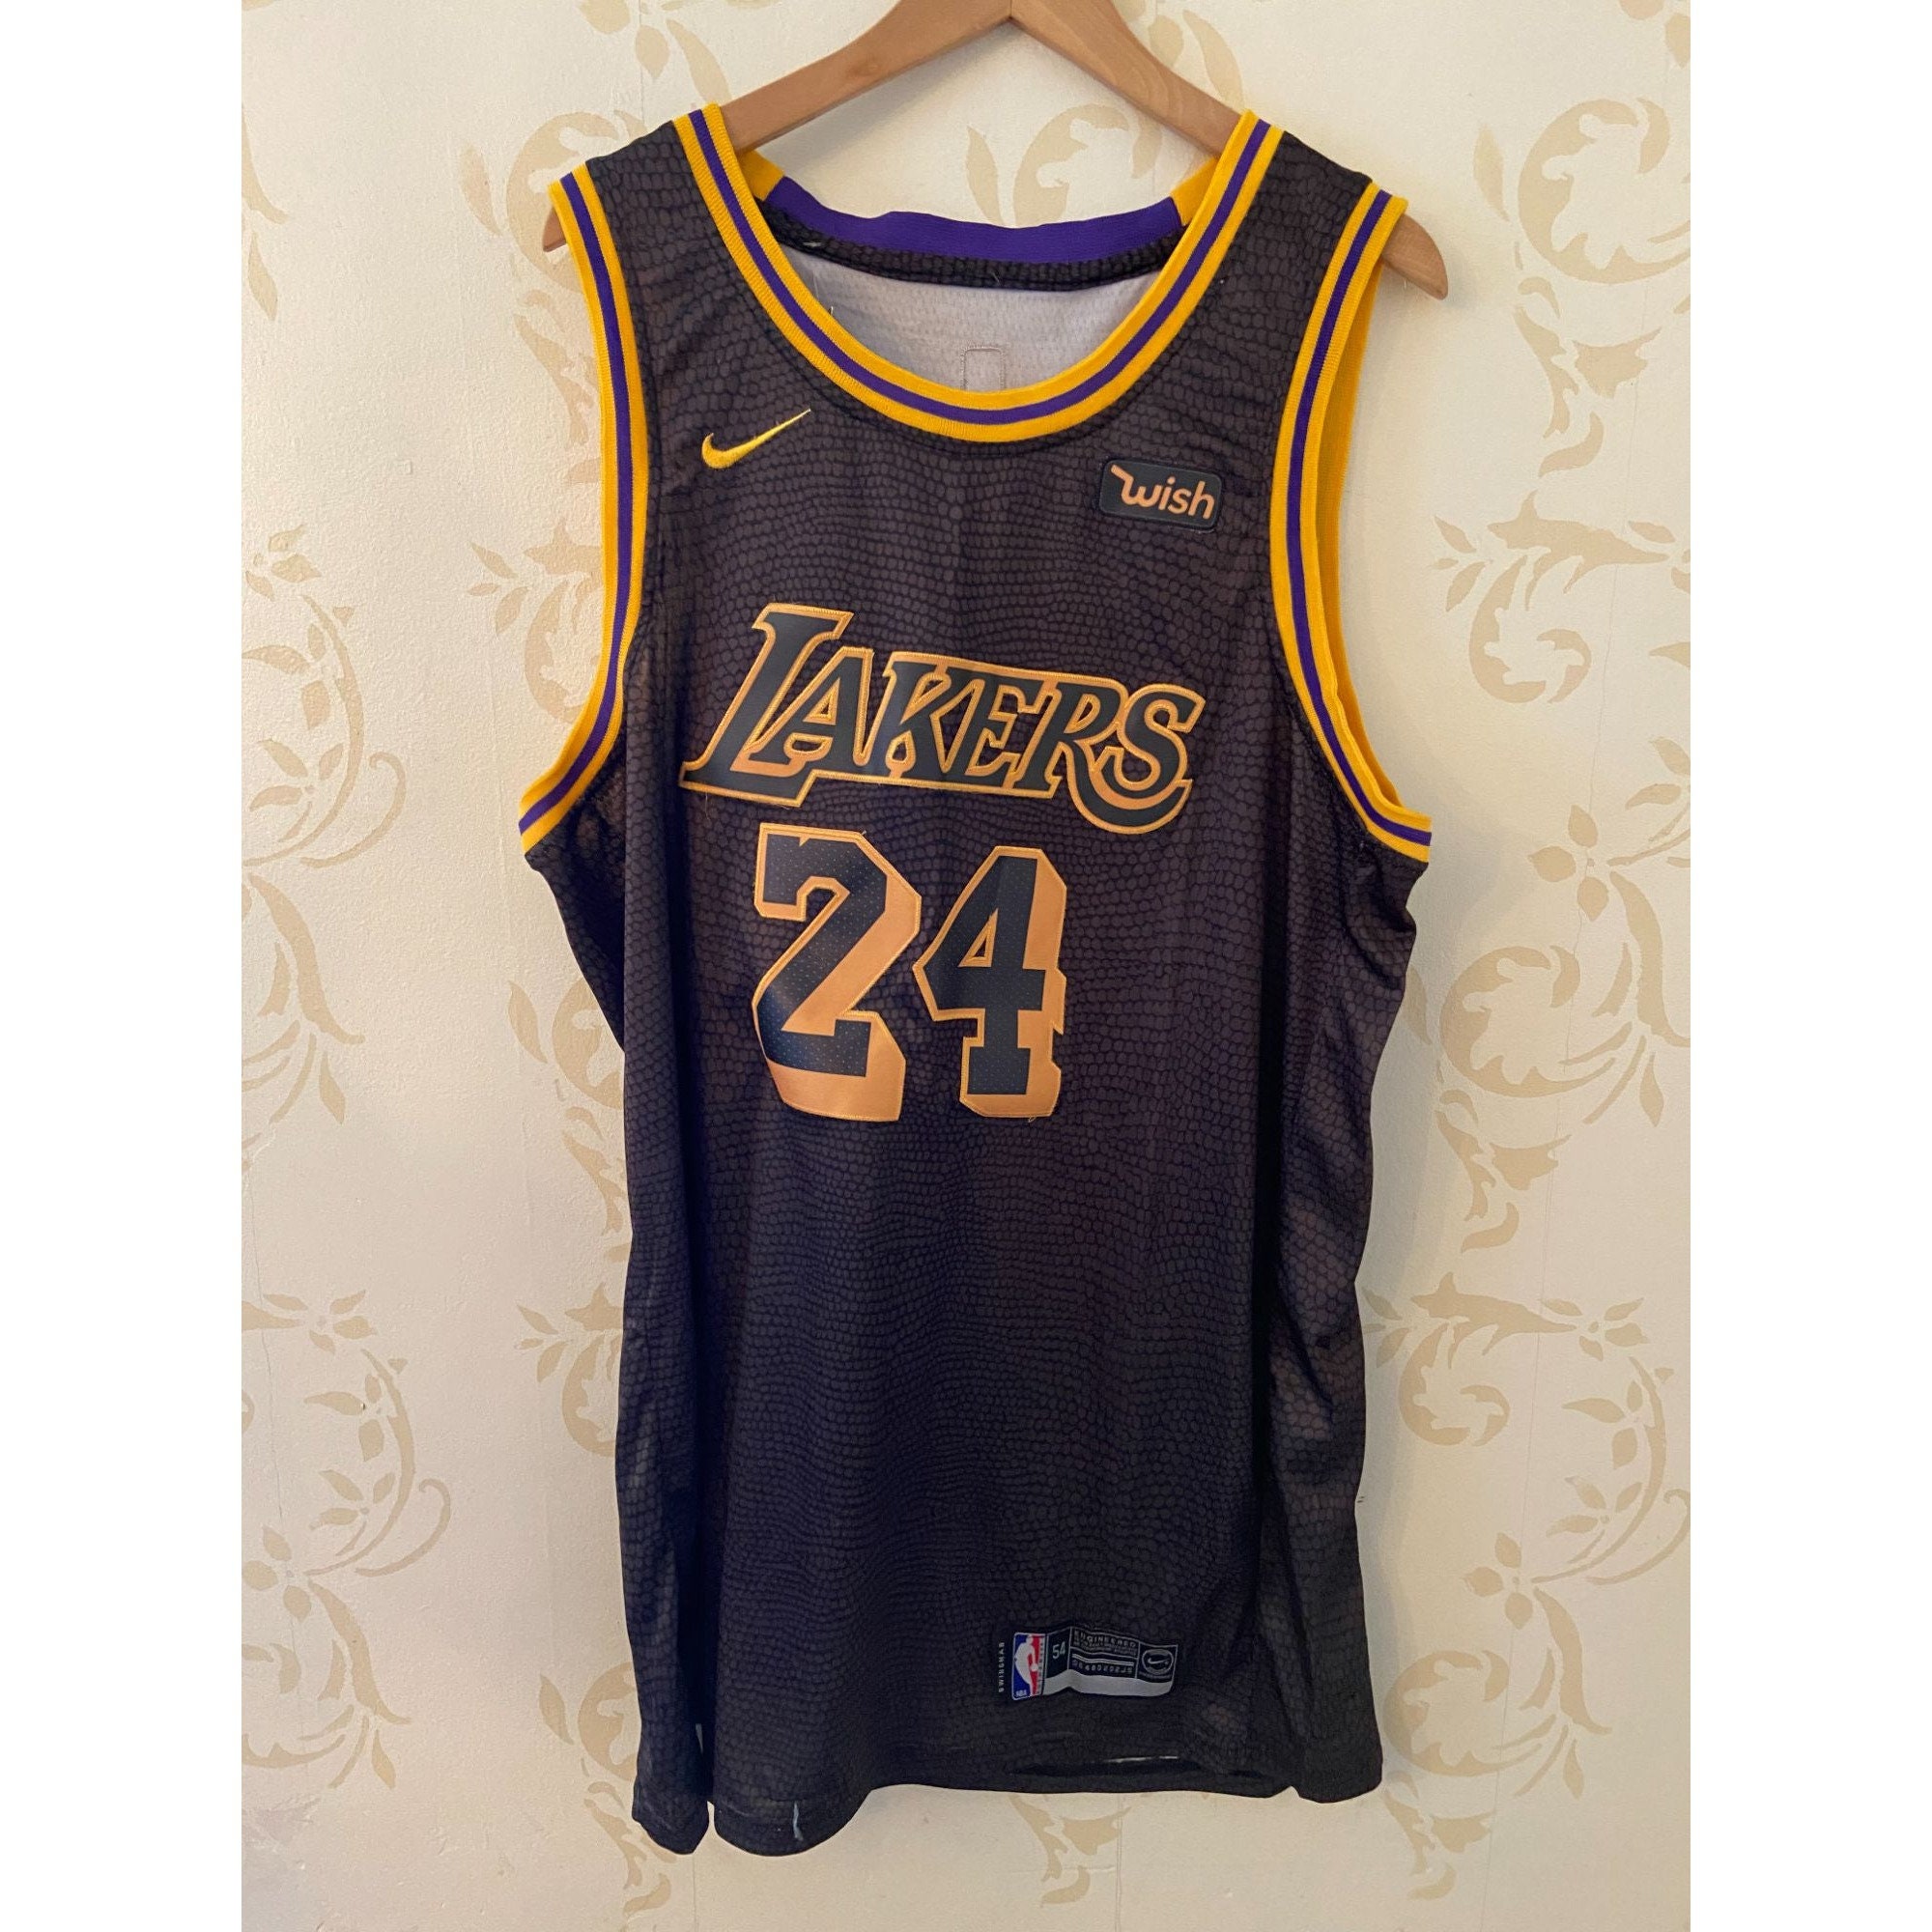 Kobe Bryant Authentic Nike Lakers Jersey New With Tags. #24 with WISH Patch